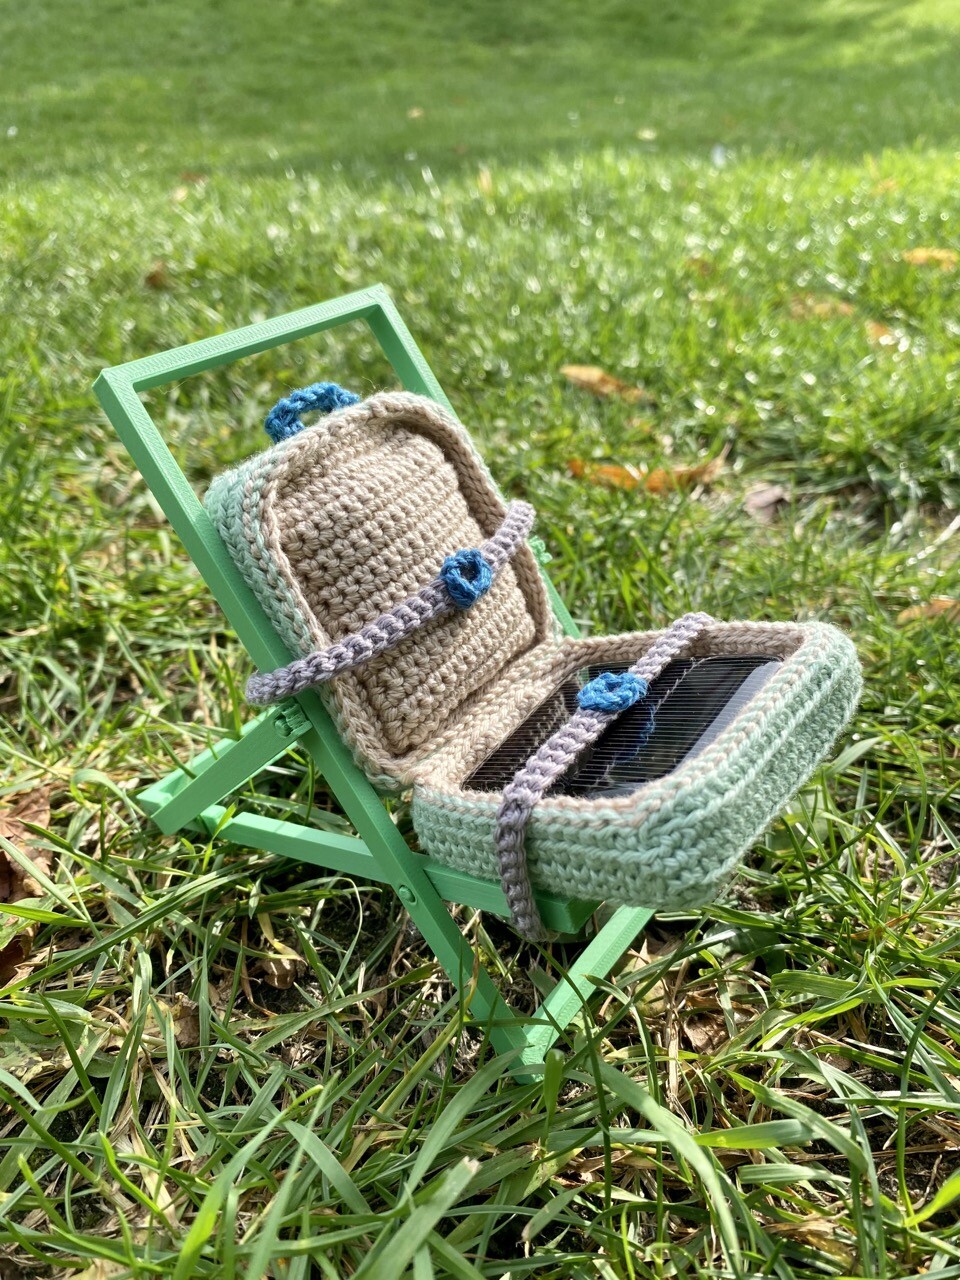 A pastel green crocheted travel suitcase with grey straps holding the suitcase in place on a 3D printed deck chair. The suitcase is opened, revealing a solar panel inside. The panel is left to charge under the sun. The background is grass in a park.